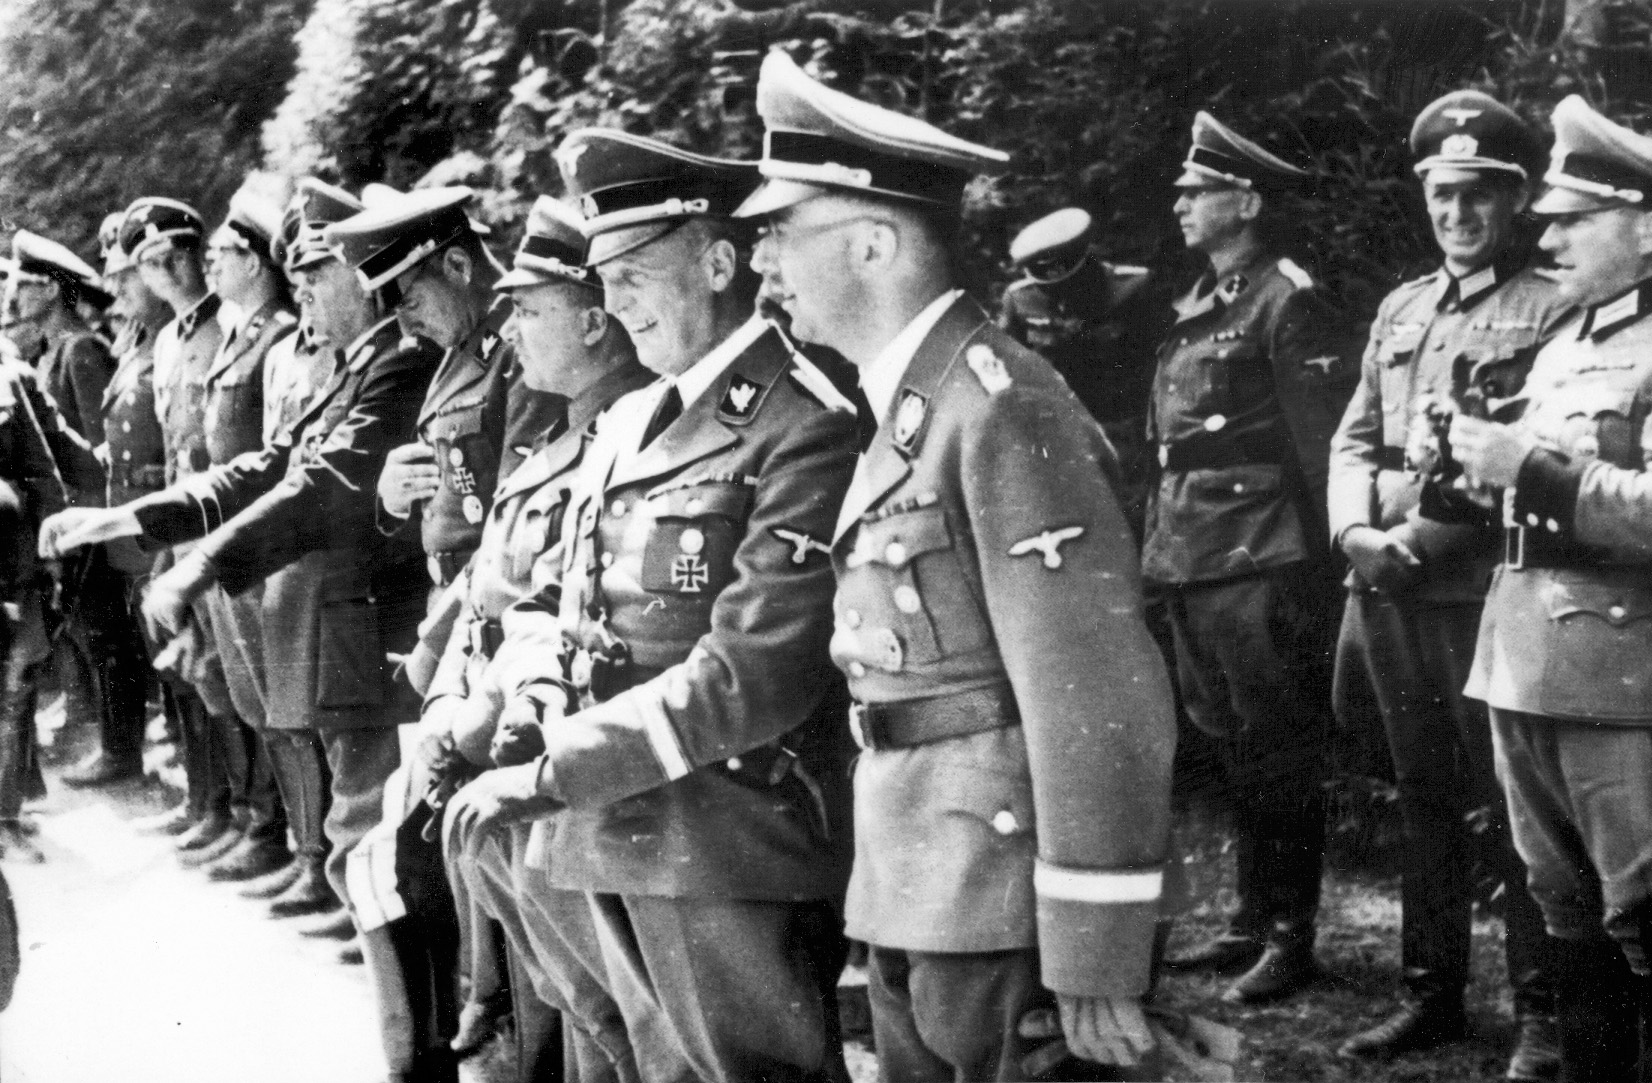 In the front row, right to left, SS Reichsführer Heinrich Himmler, chief planner of the Final Solution; Reich Chancellery head Dr. Hans Lammers; and Reich Leader Martin Bormann observe the ceremonies marking the surrender of France at Compeigne on June 21, 1940.